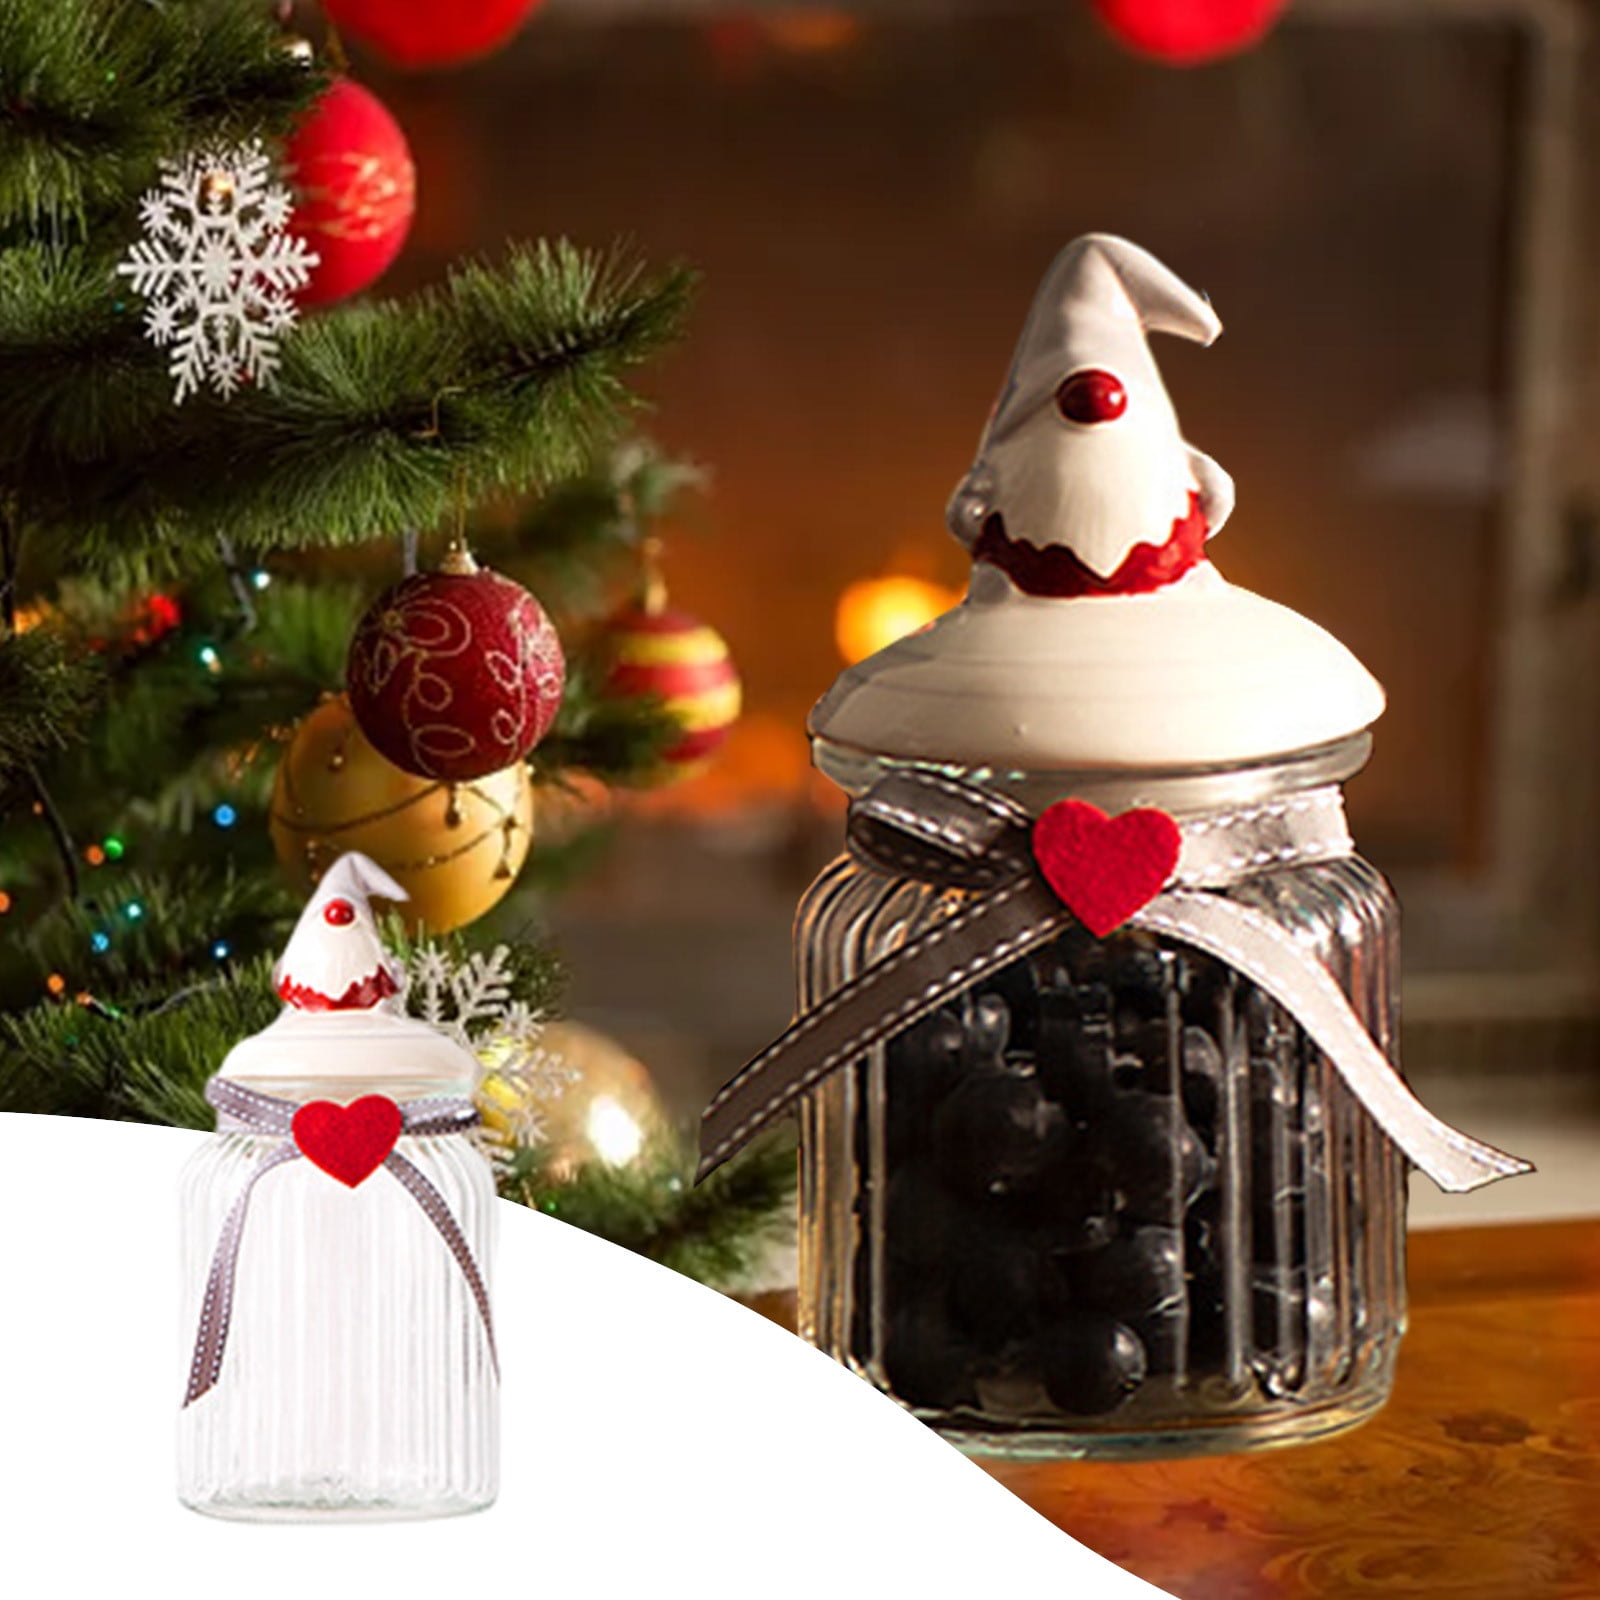 Angoily Christmas Cookie Jars, Christmas Cookie Jars with Lids, Gnome Candy Jar Ceramic Treat Container Tea Can with Lid for Holiday Christmas